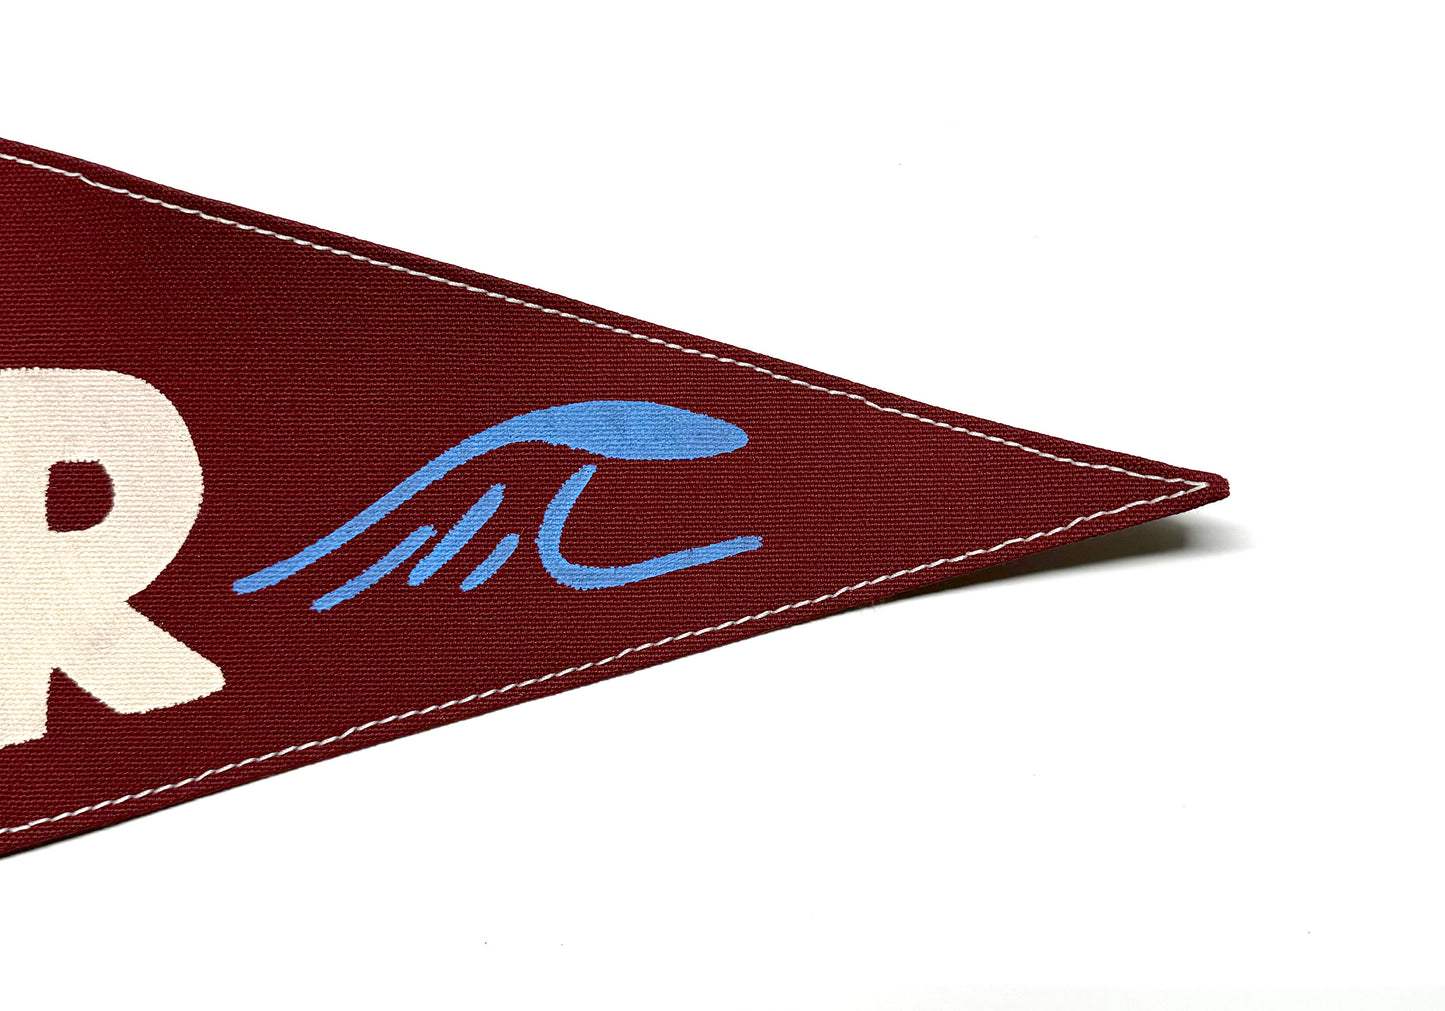 Rocky River Vintage-Inspired Pennant